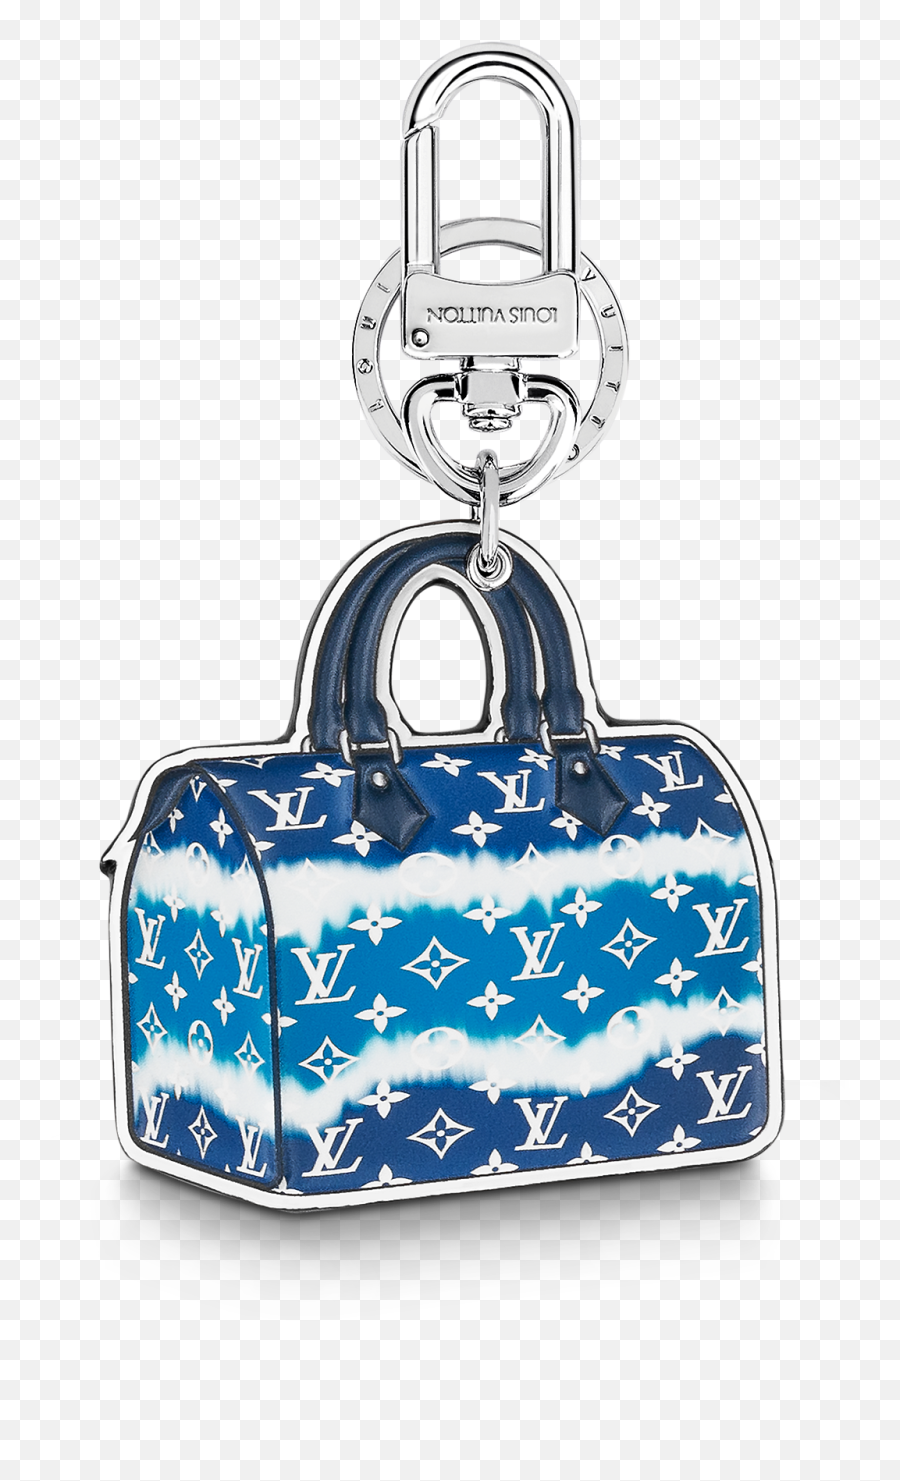 Key Holder Lv Review English As A Second Language At Rice Emoji,Emoticon Keychain Leather Designer